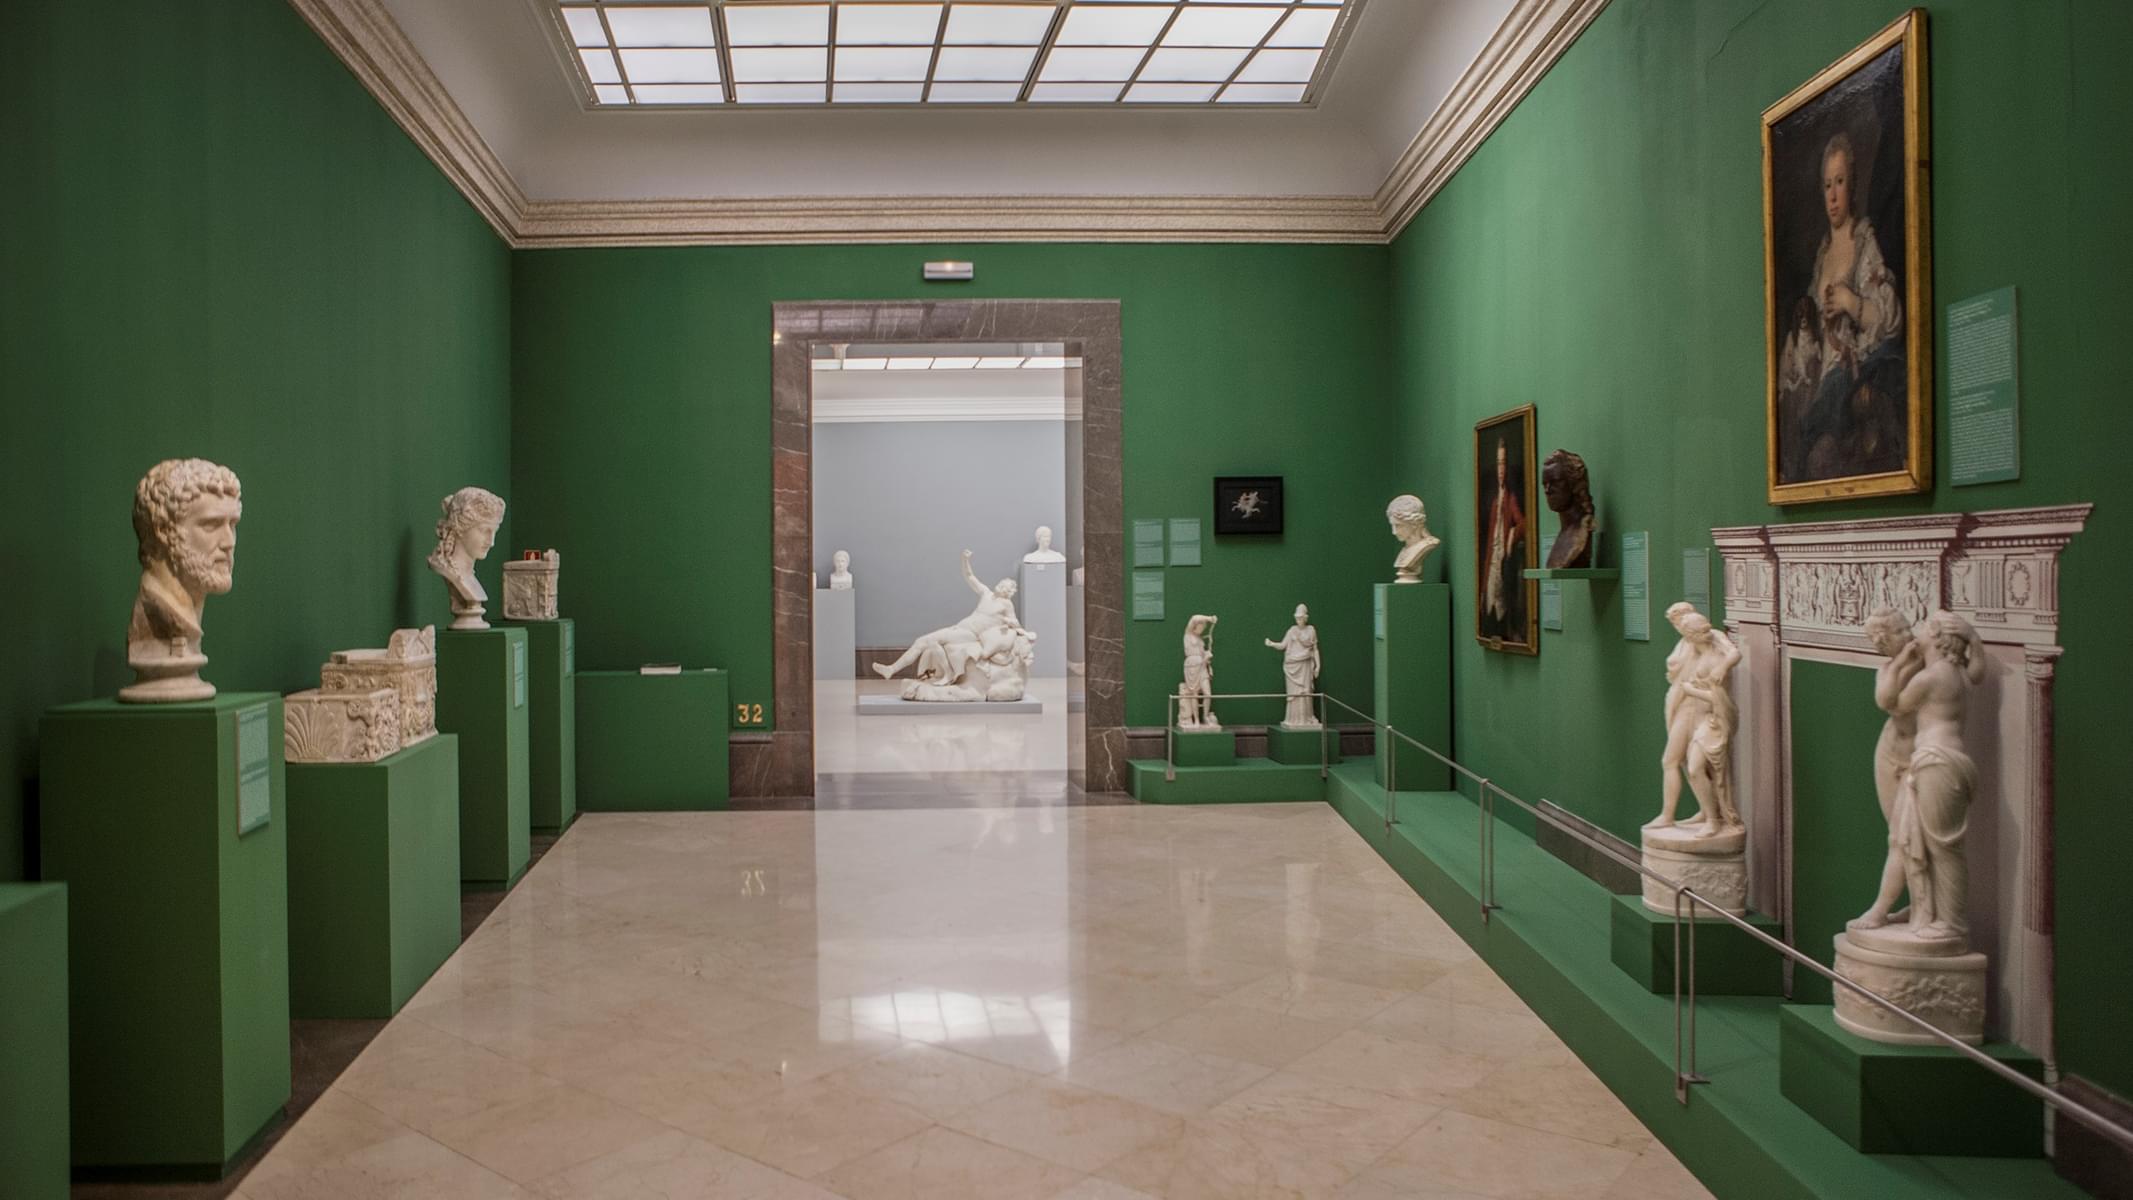 Be amazed by walking through the galleries displaying amazing sculptures